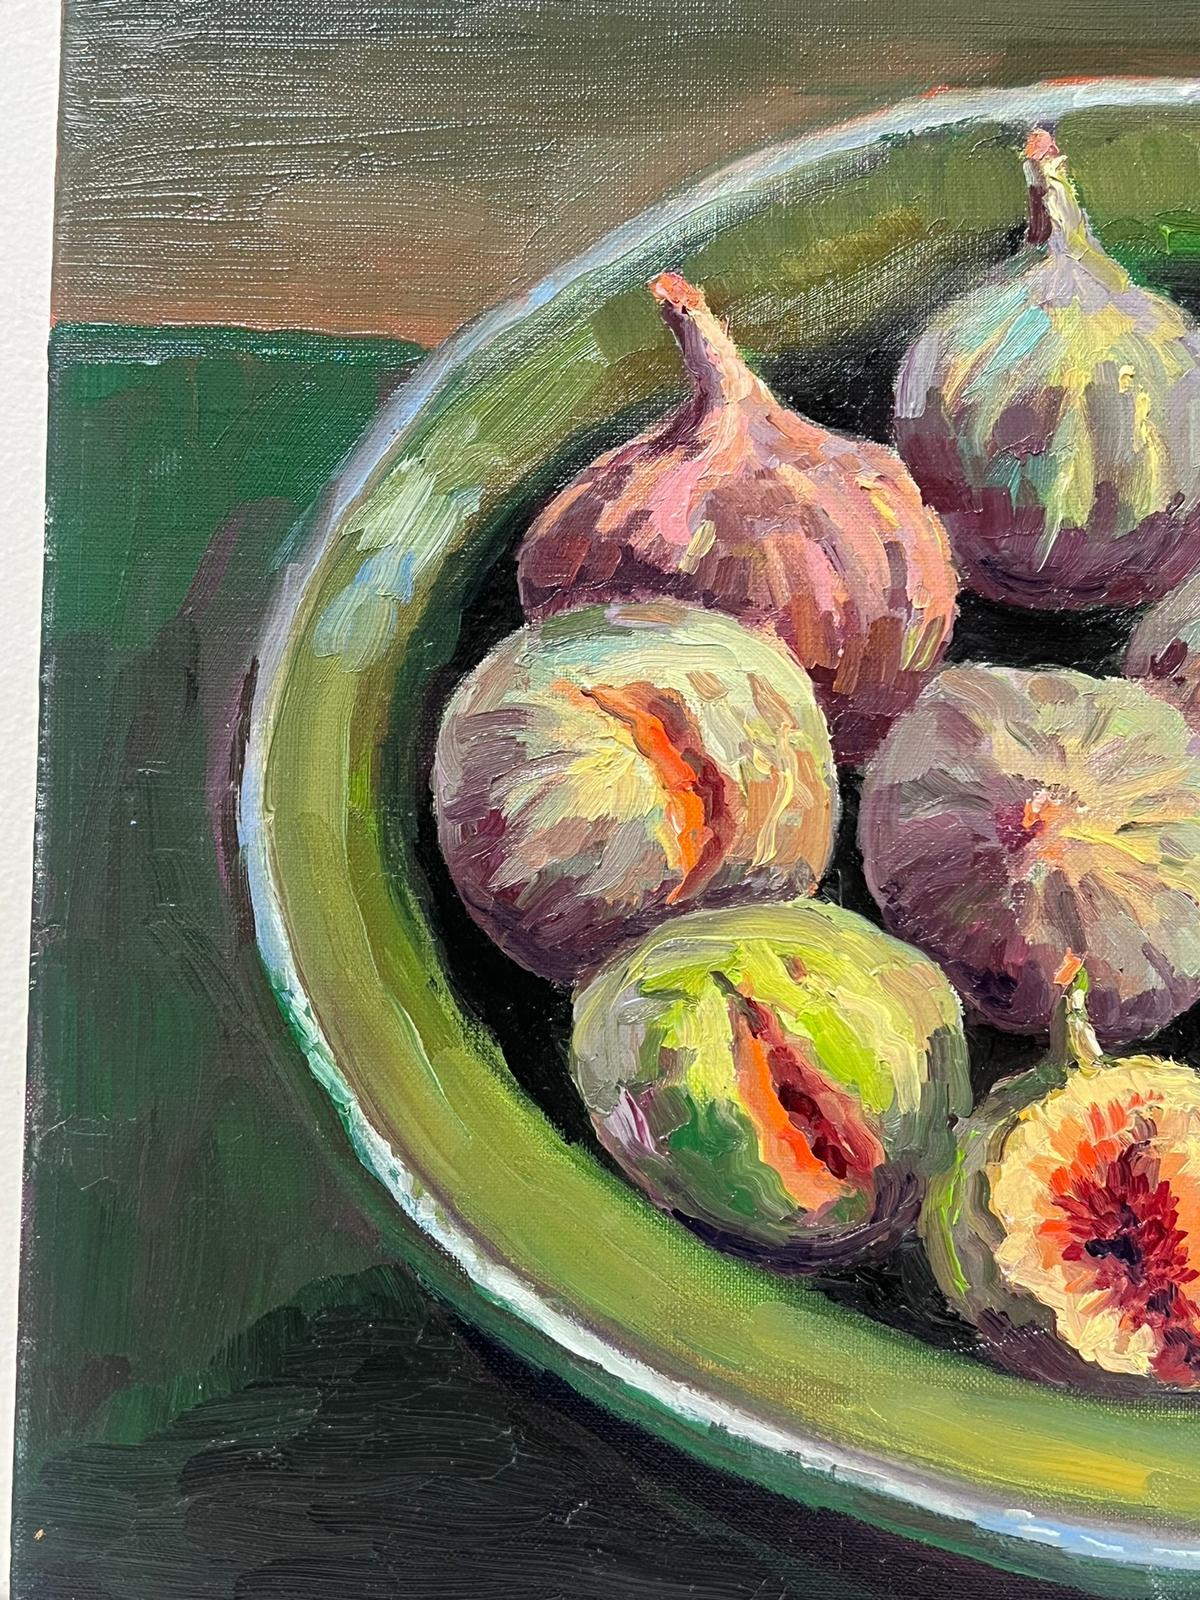 Fresh Figs
by Georges Bordonave (French contemporary)  
signed oil painting on canvas, unframed
dated
canvas: 13 x 16 inches
condition: very good
provenance: from a large private collection of this artists work, western Paris, France. 